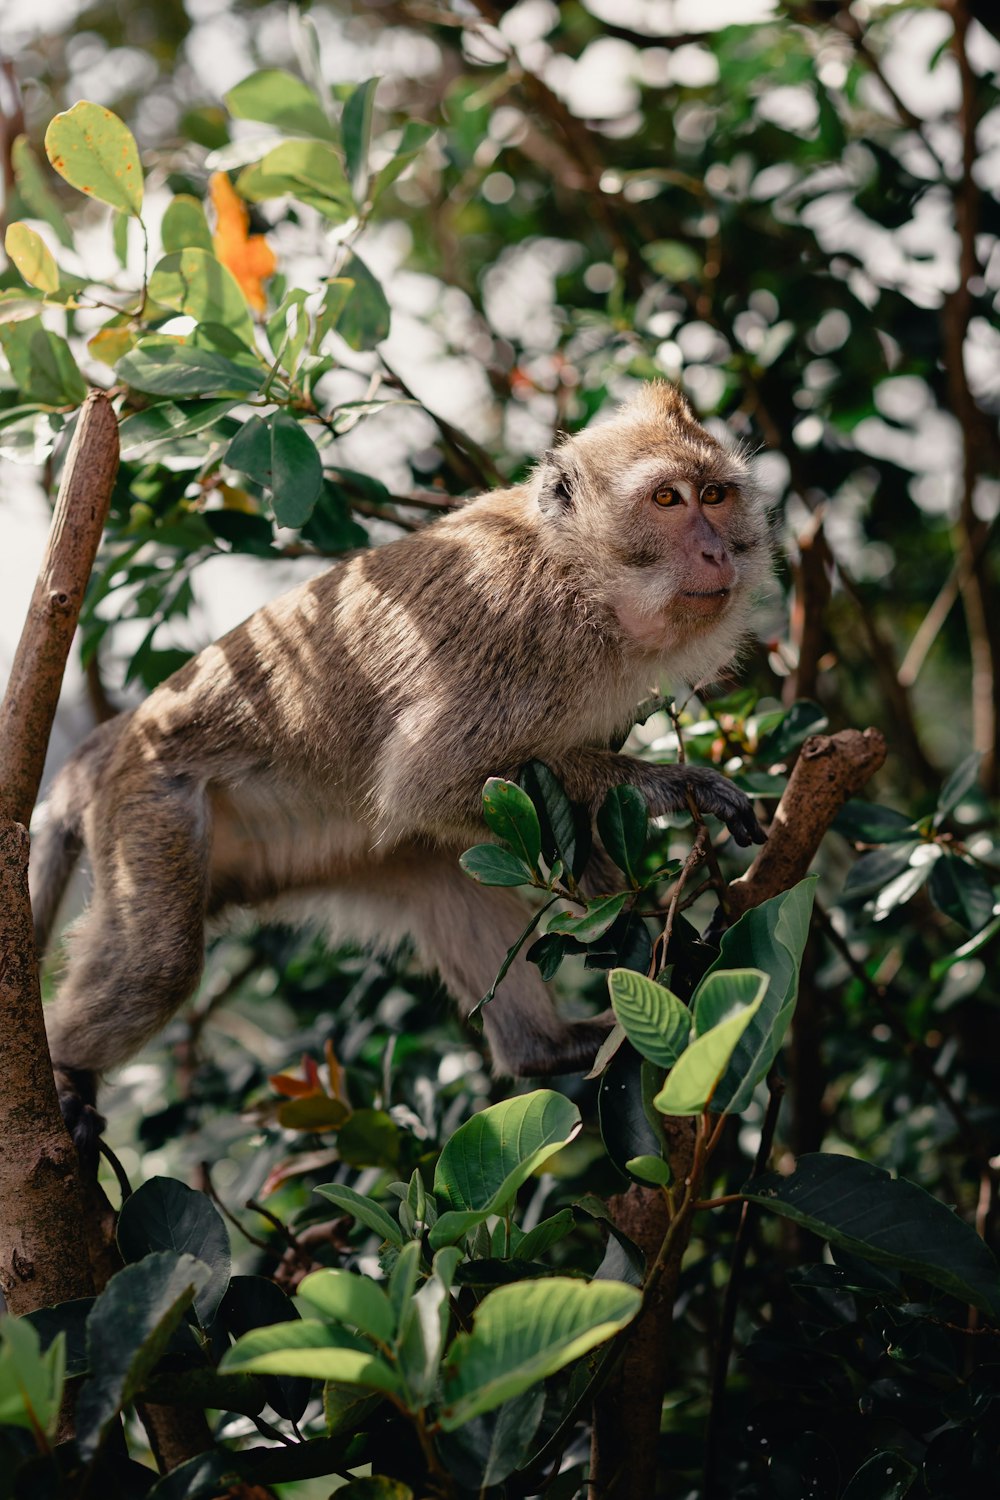 a small monkey hanging from a tree branch